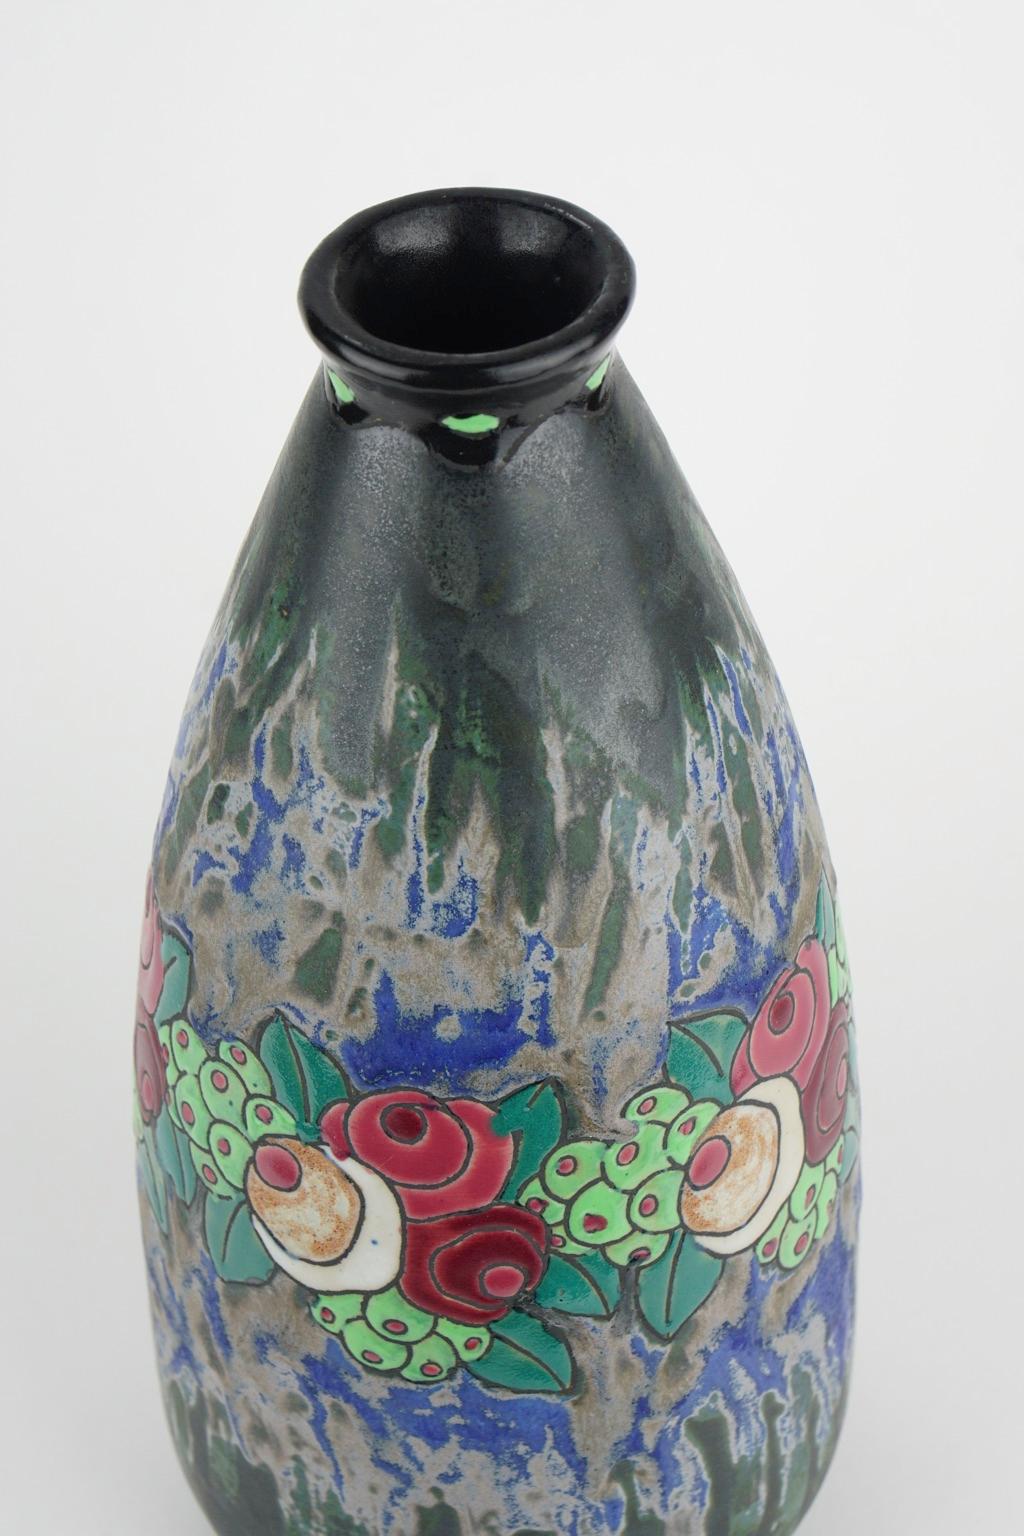 This Art Deco Keramis stoneware vase has a polychrome design with a garland of stylised small roses, leaves and fruits in a blue and dark green background. D 700. F 898. Charles Catteau (1880-1966).

Size: Height 31.2 cm, diameter base 9.9 cm,